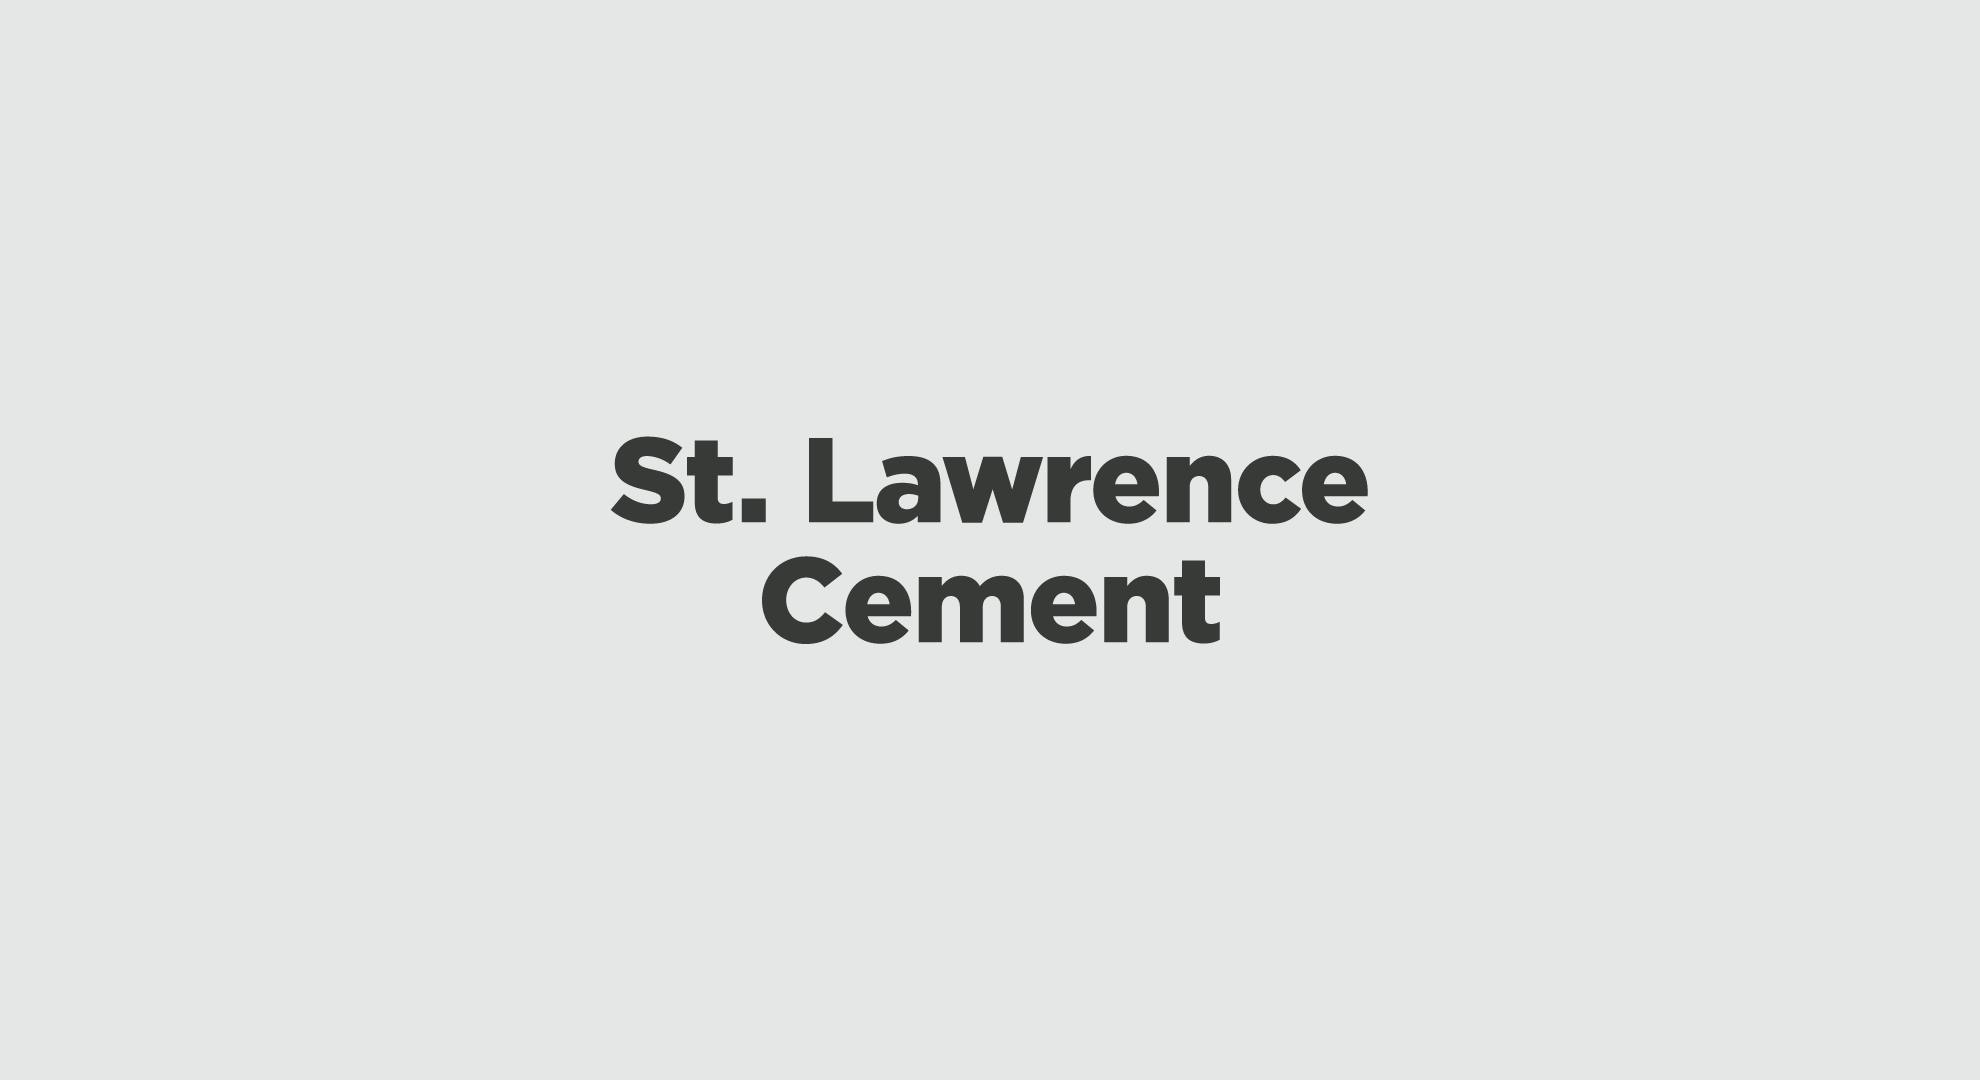 St. Lawrence Cement Graphic